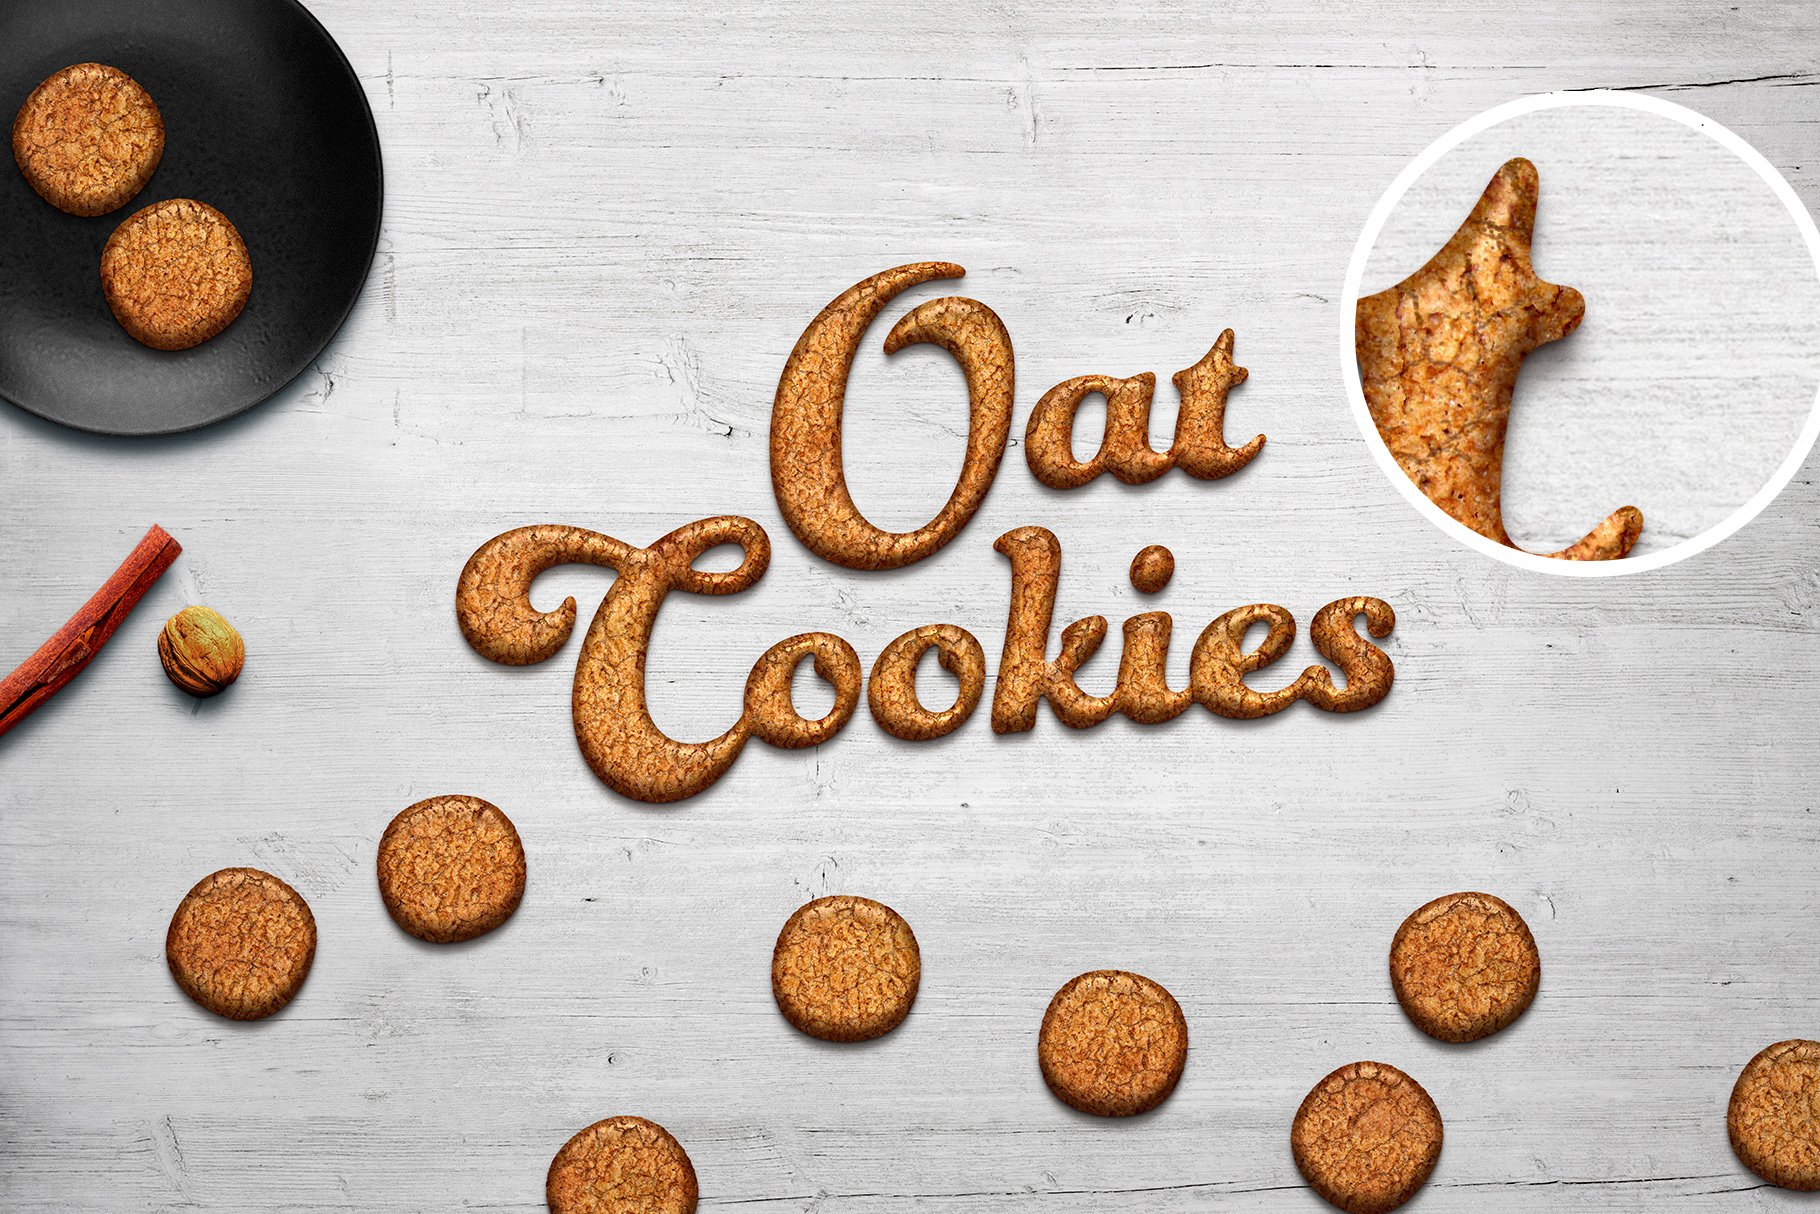 foody cristmas edition food lettering and scene creator oat cookies 80